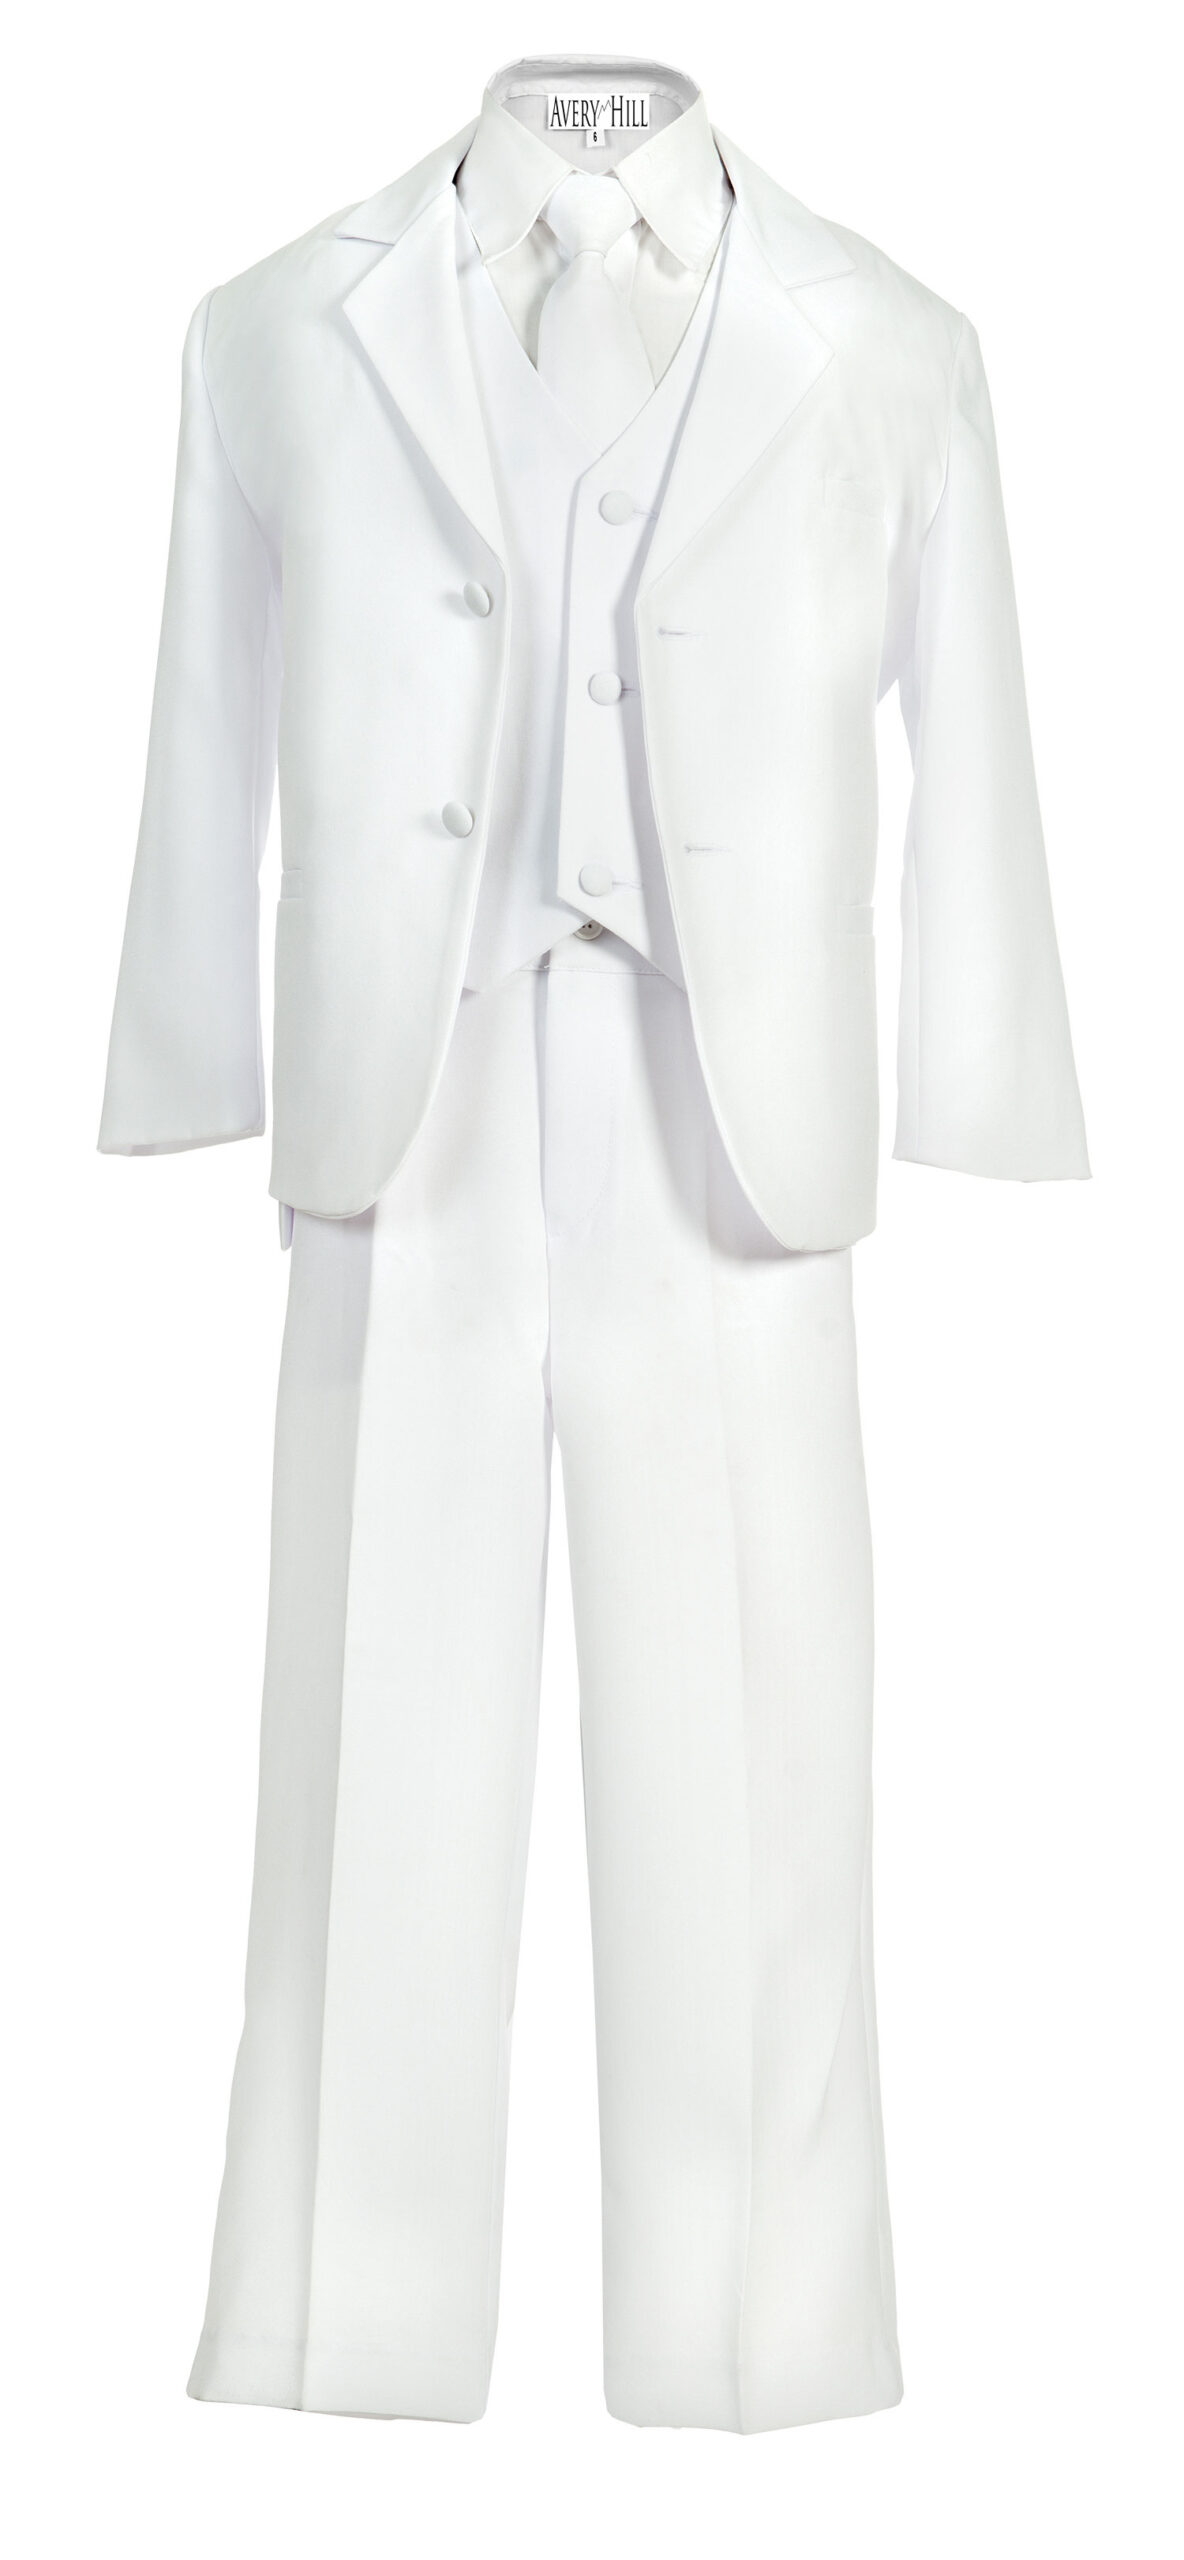 Avery Hill Boys Formal 5 Piece Suit with Shirt and Vest White - 3T